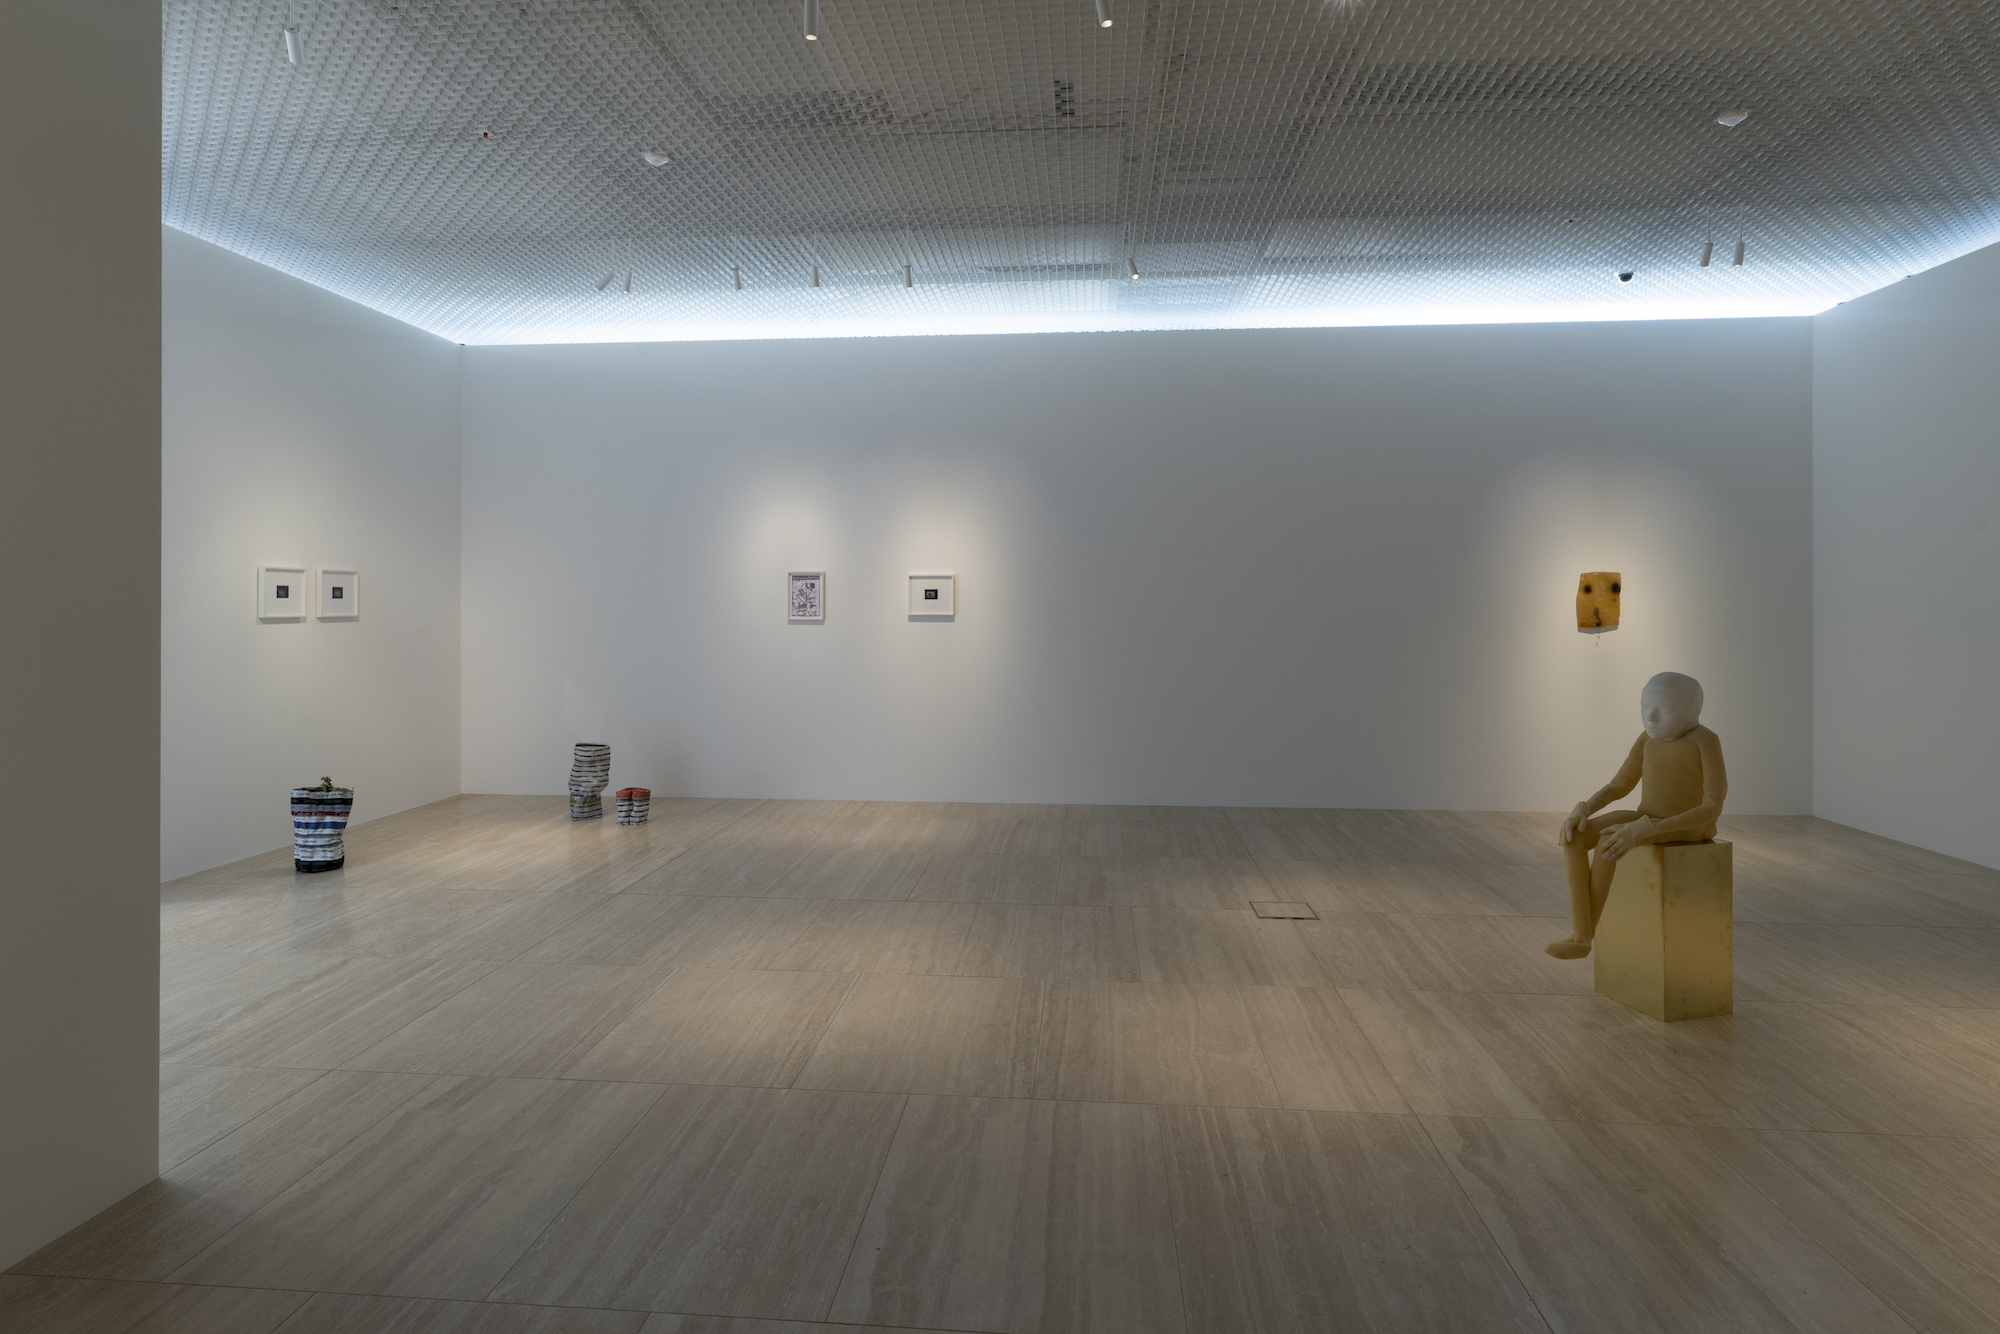 Installation view of Â«Who can hear the monster speak?Â» at Baloise Park Art Forum with works by Keren Cytter, Shahryar Nashat, Benedicte Gyldenstierne Sehested, Daniel Topka, Anna Uddenberg and Bri Williams.